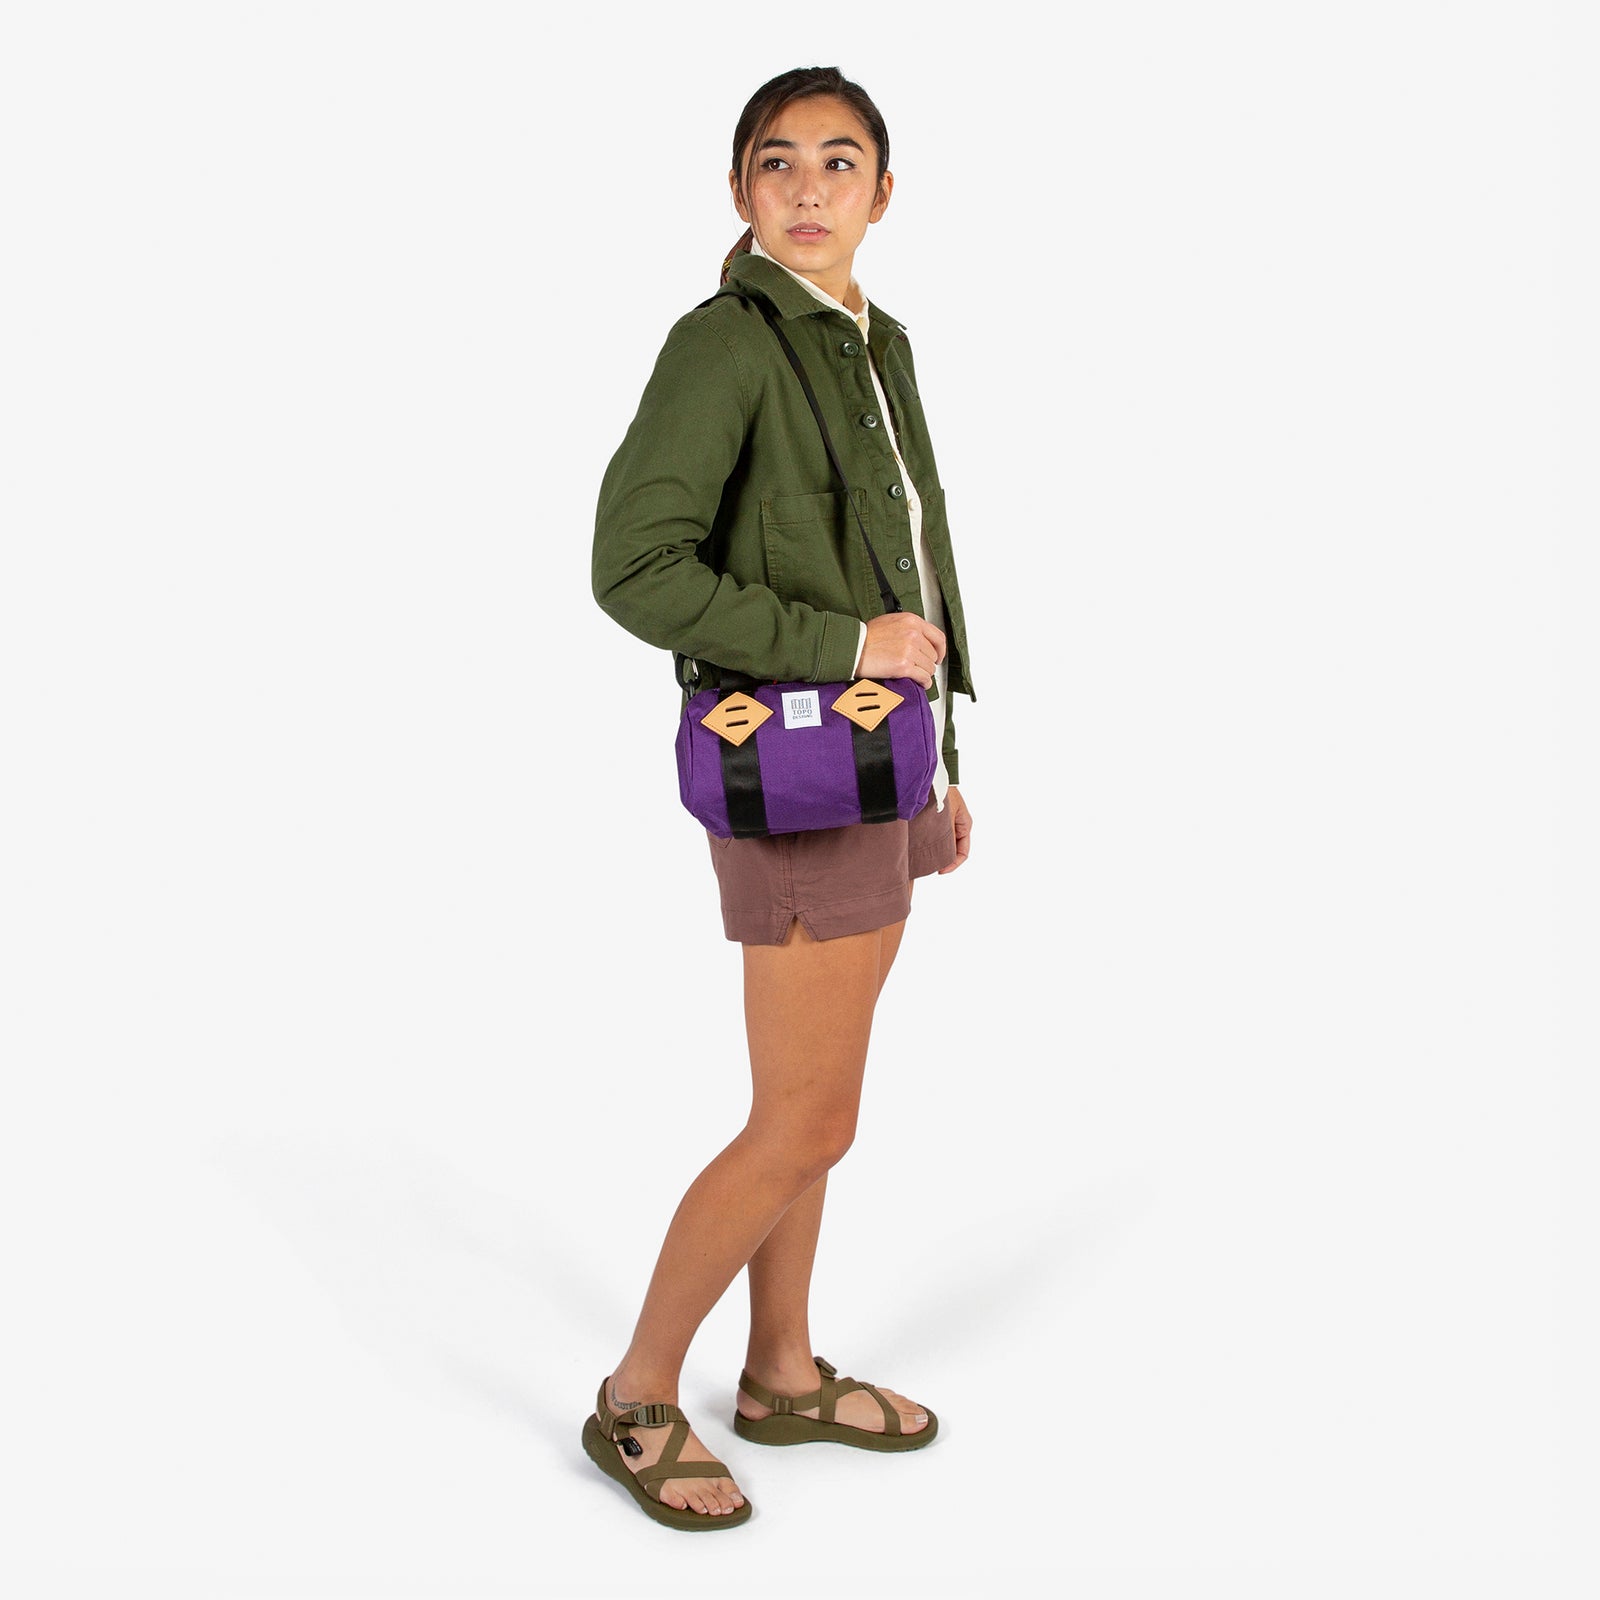 General shot of Topo Designs Mini Classic Duffel Bag shoulder crossbody purse in Purple held by model with shoulder strap.